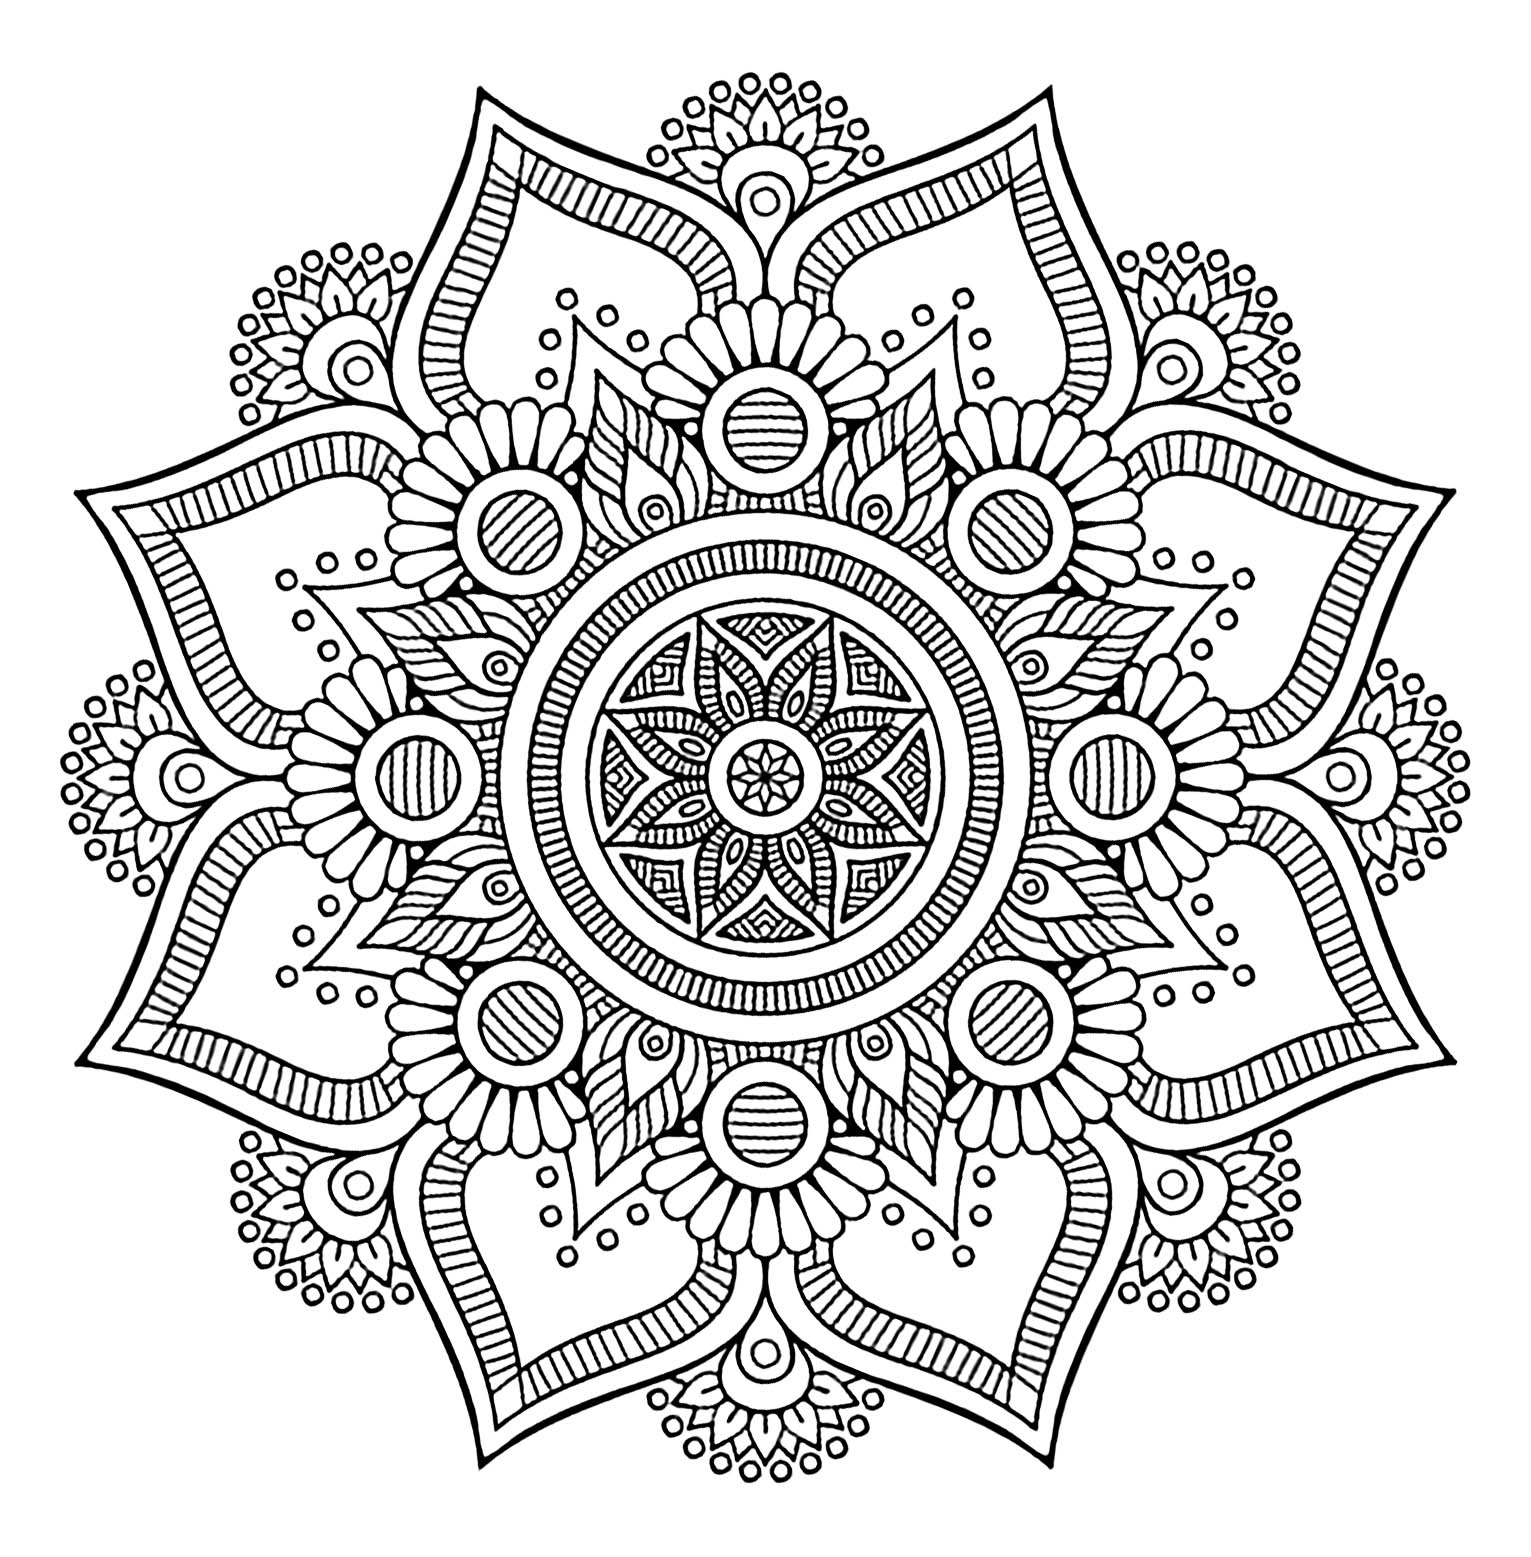 The big flower MandalasColoring Pages